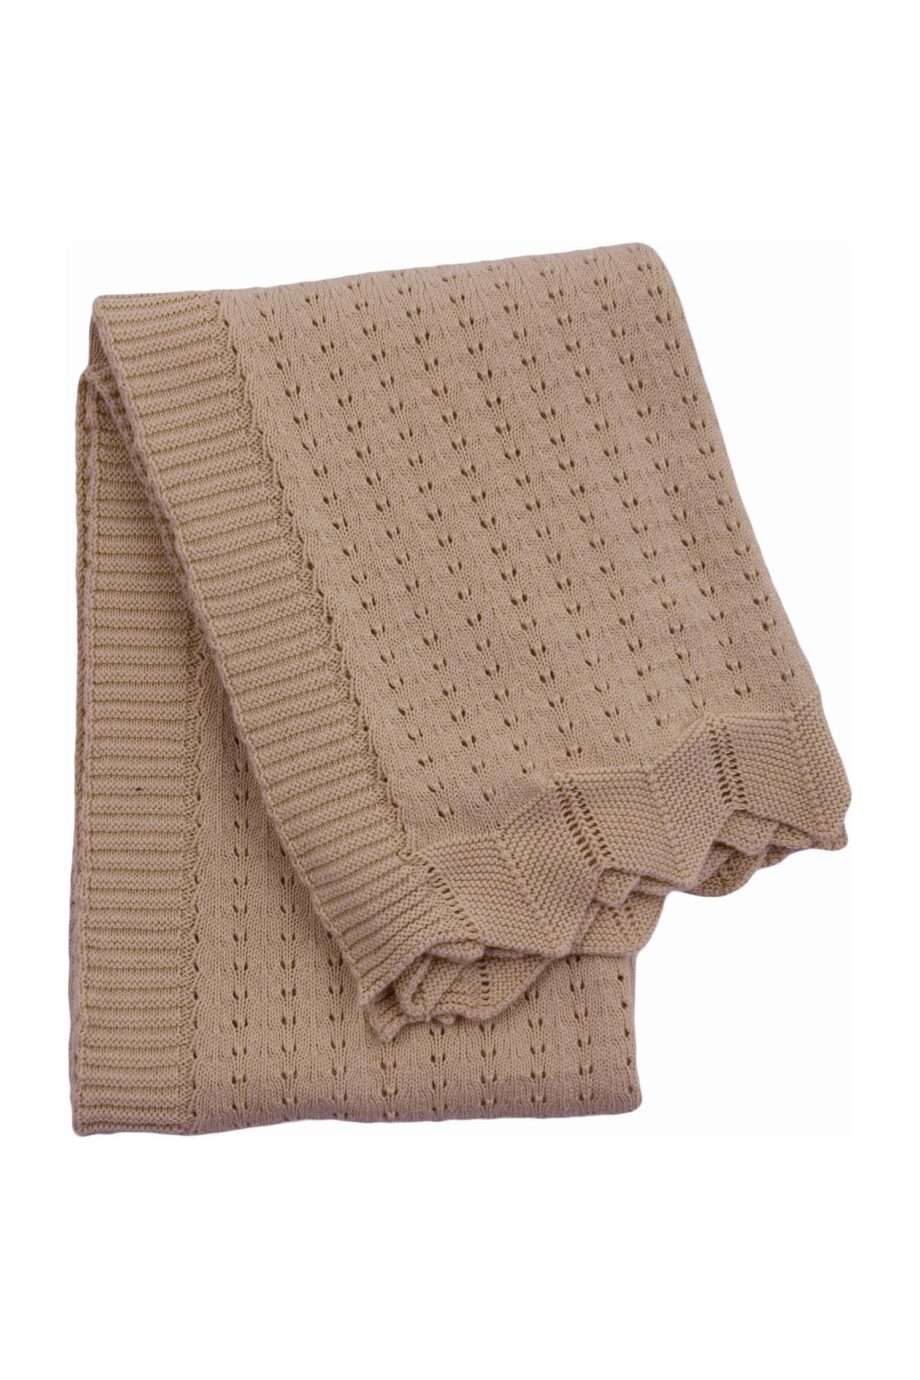 nouveau powder rose knitted cotton little blanket small